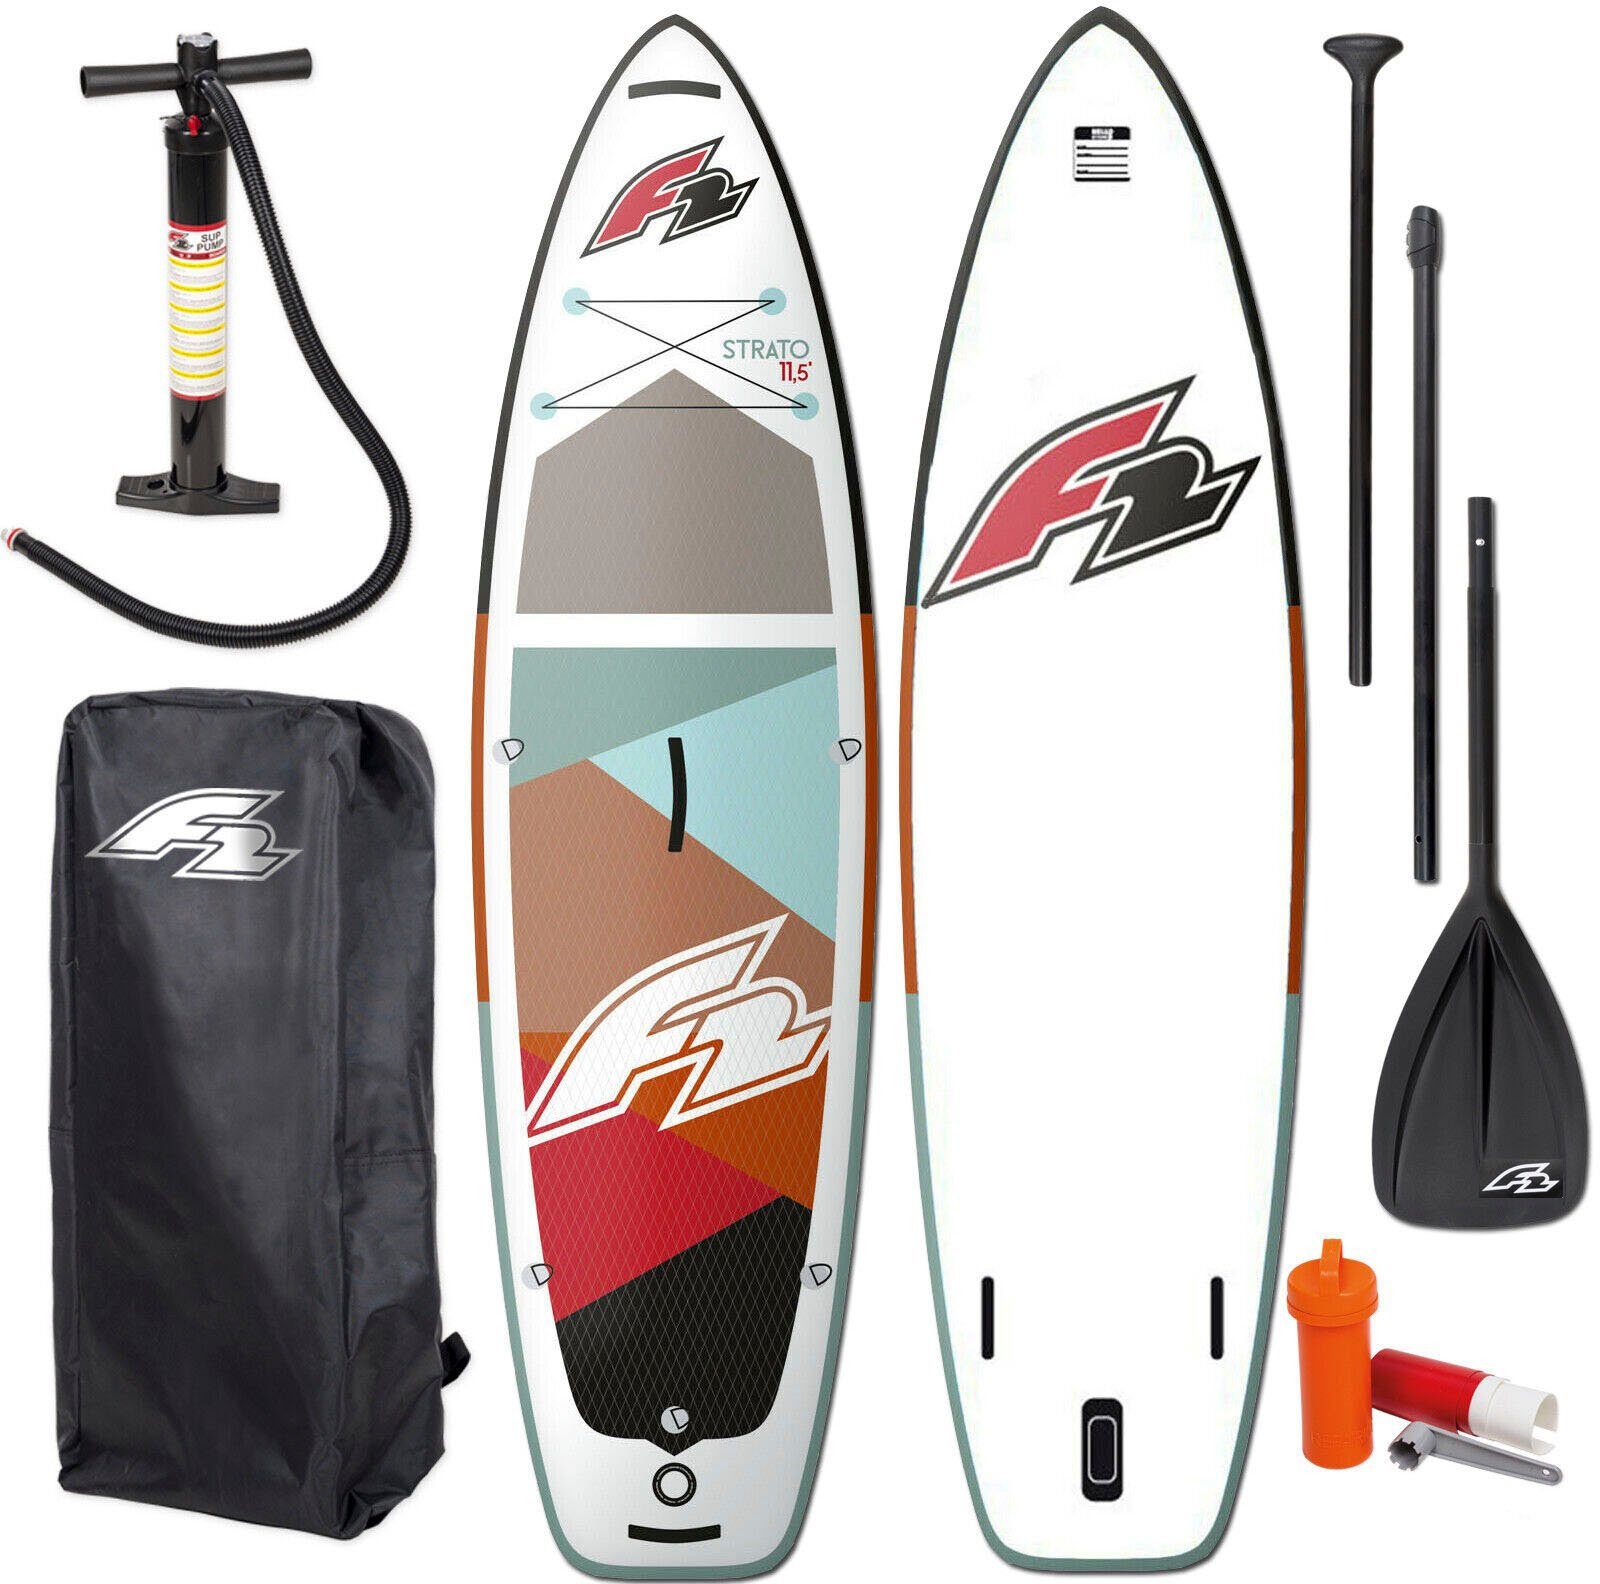 F2 Inflatable (Packung, 5 women SUP-Board red, tlg) 10,5 Strato